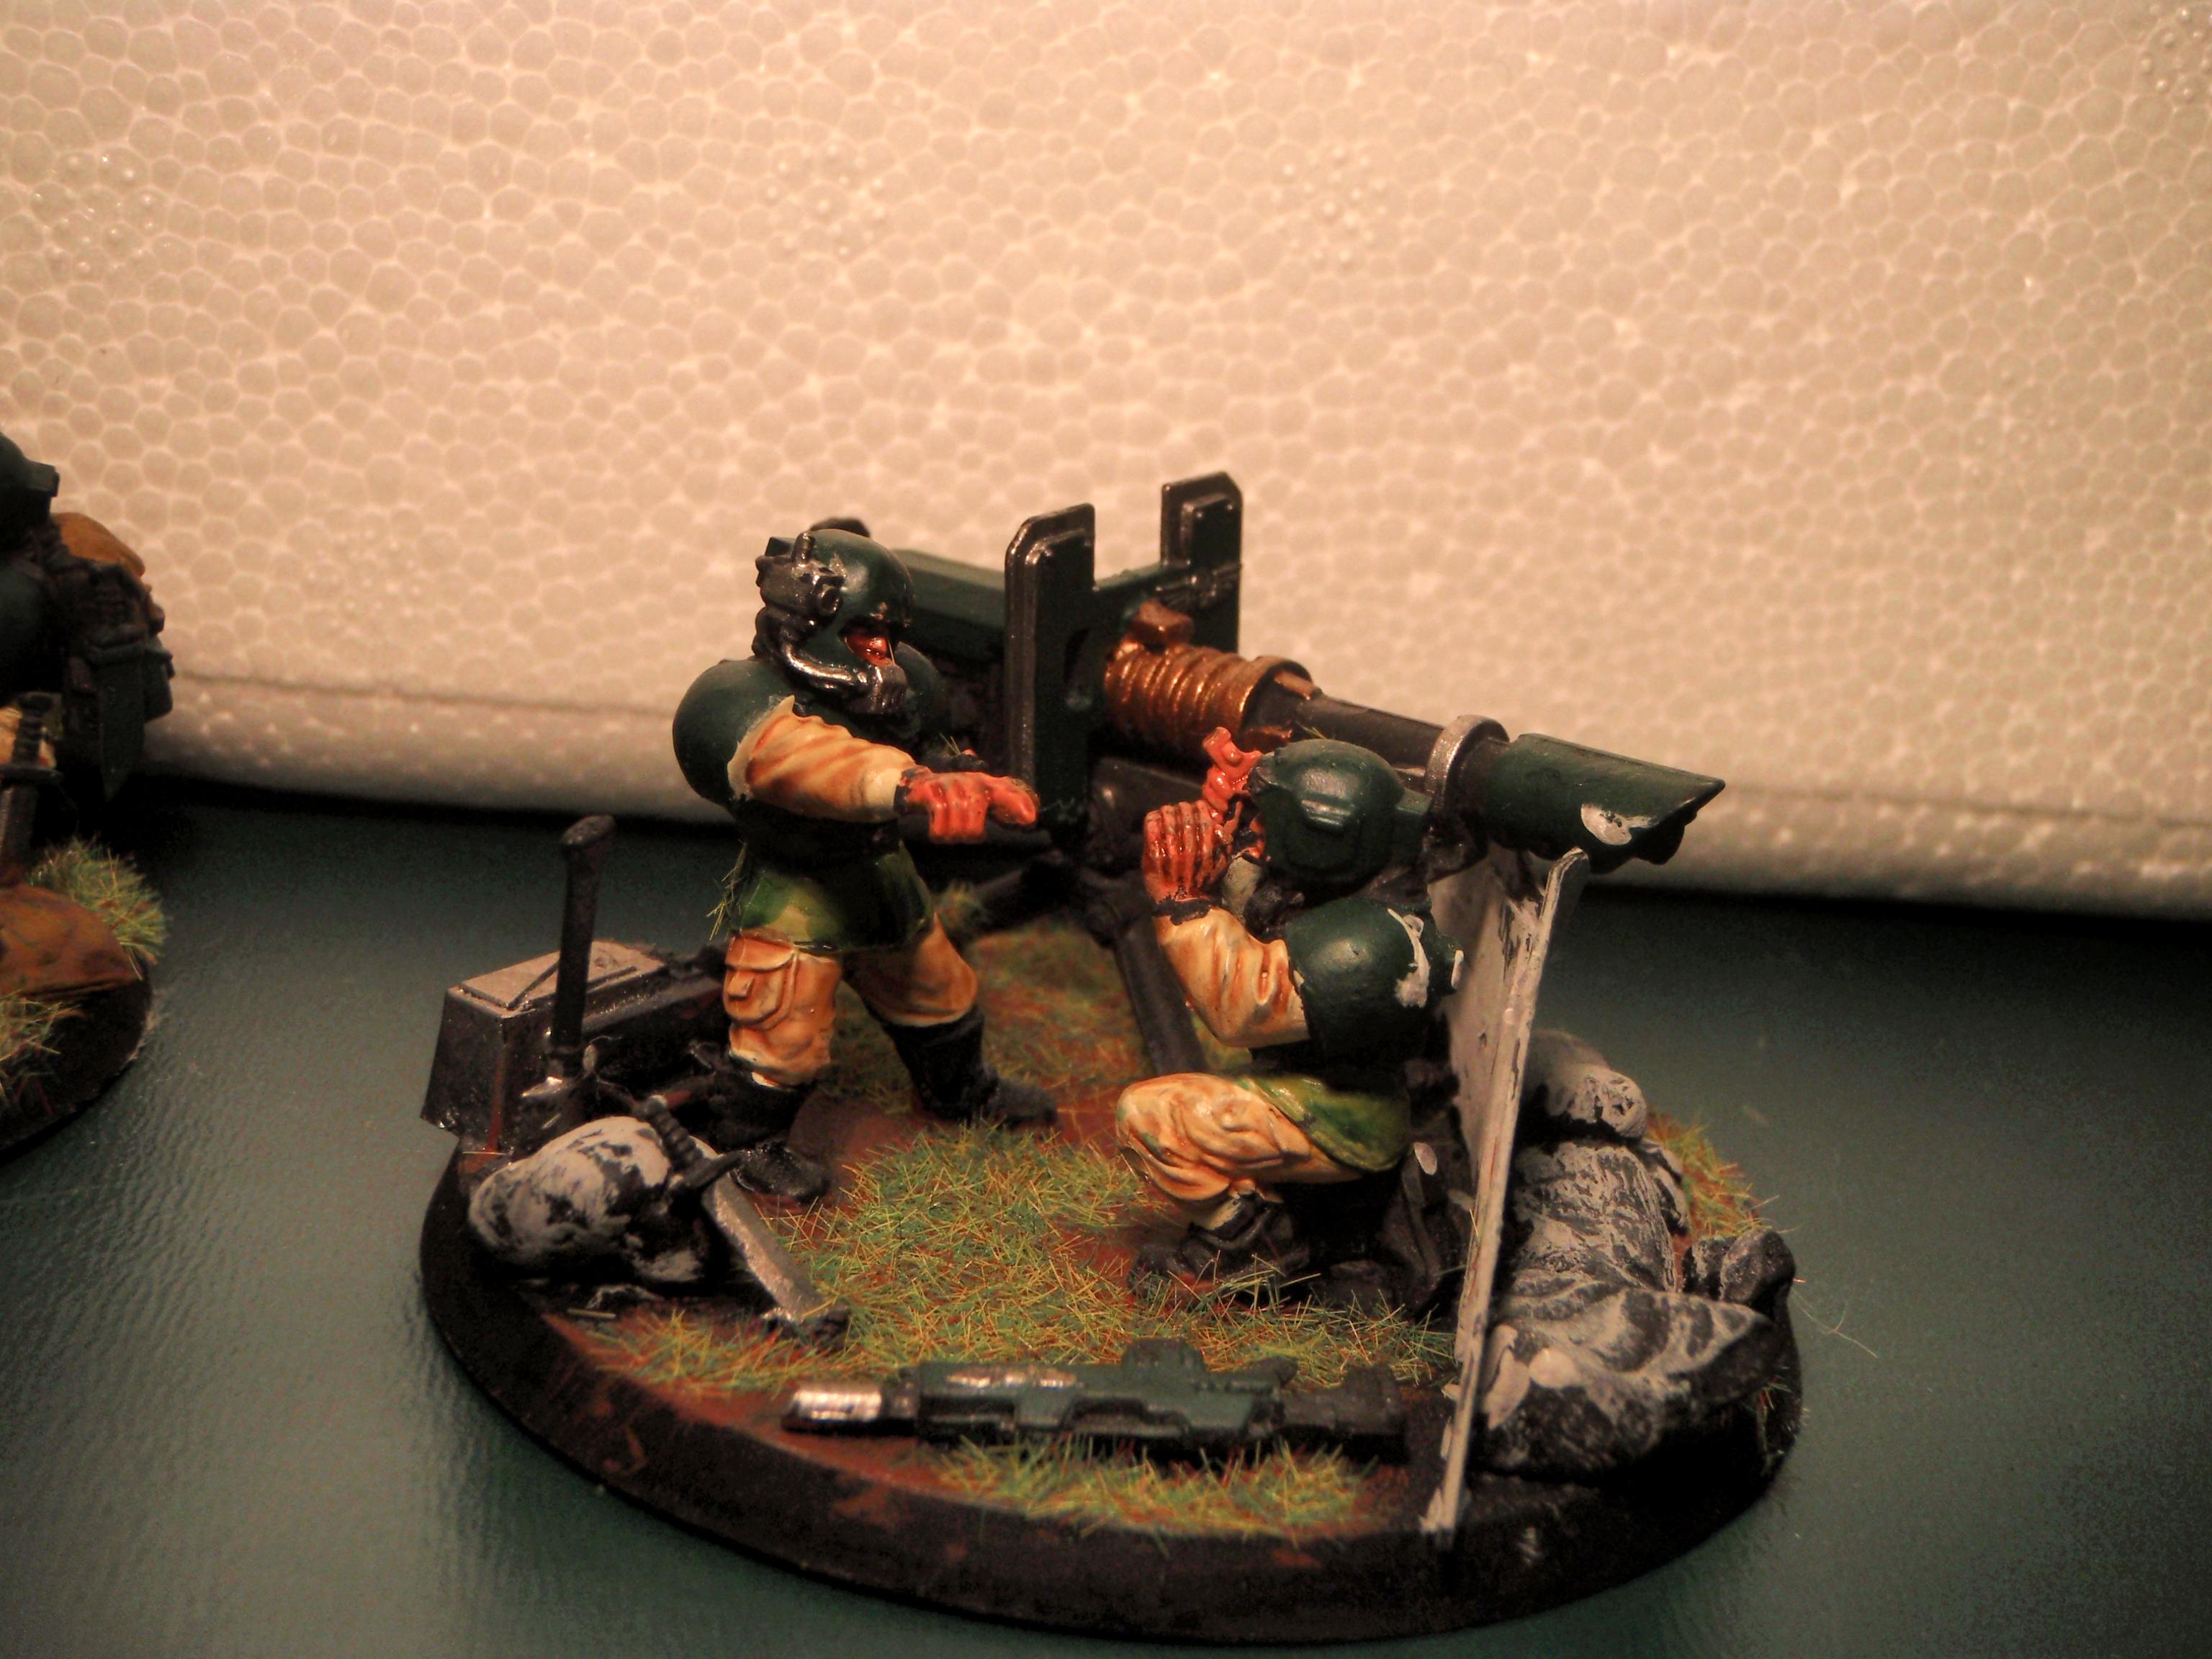 Cadians, Heavy Weapons Team, Imperial Guard, Warhammer 40,000